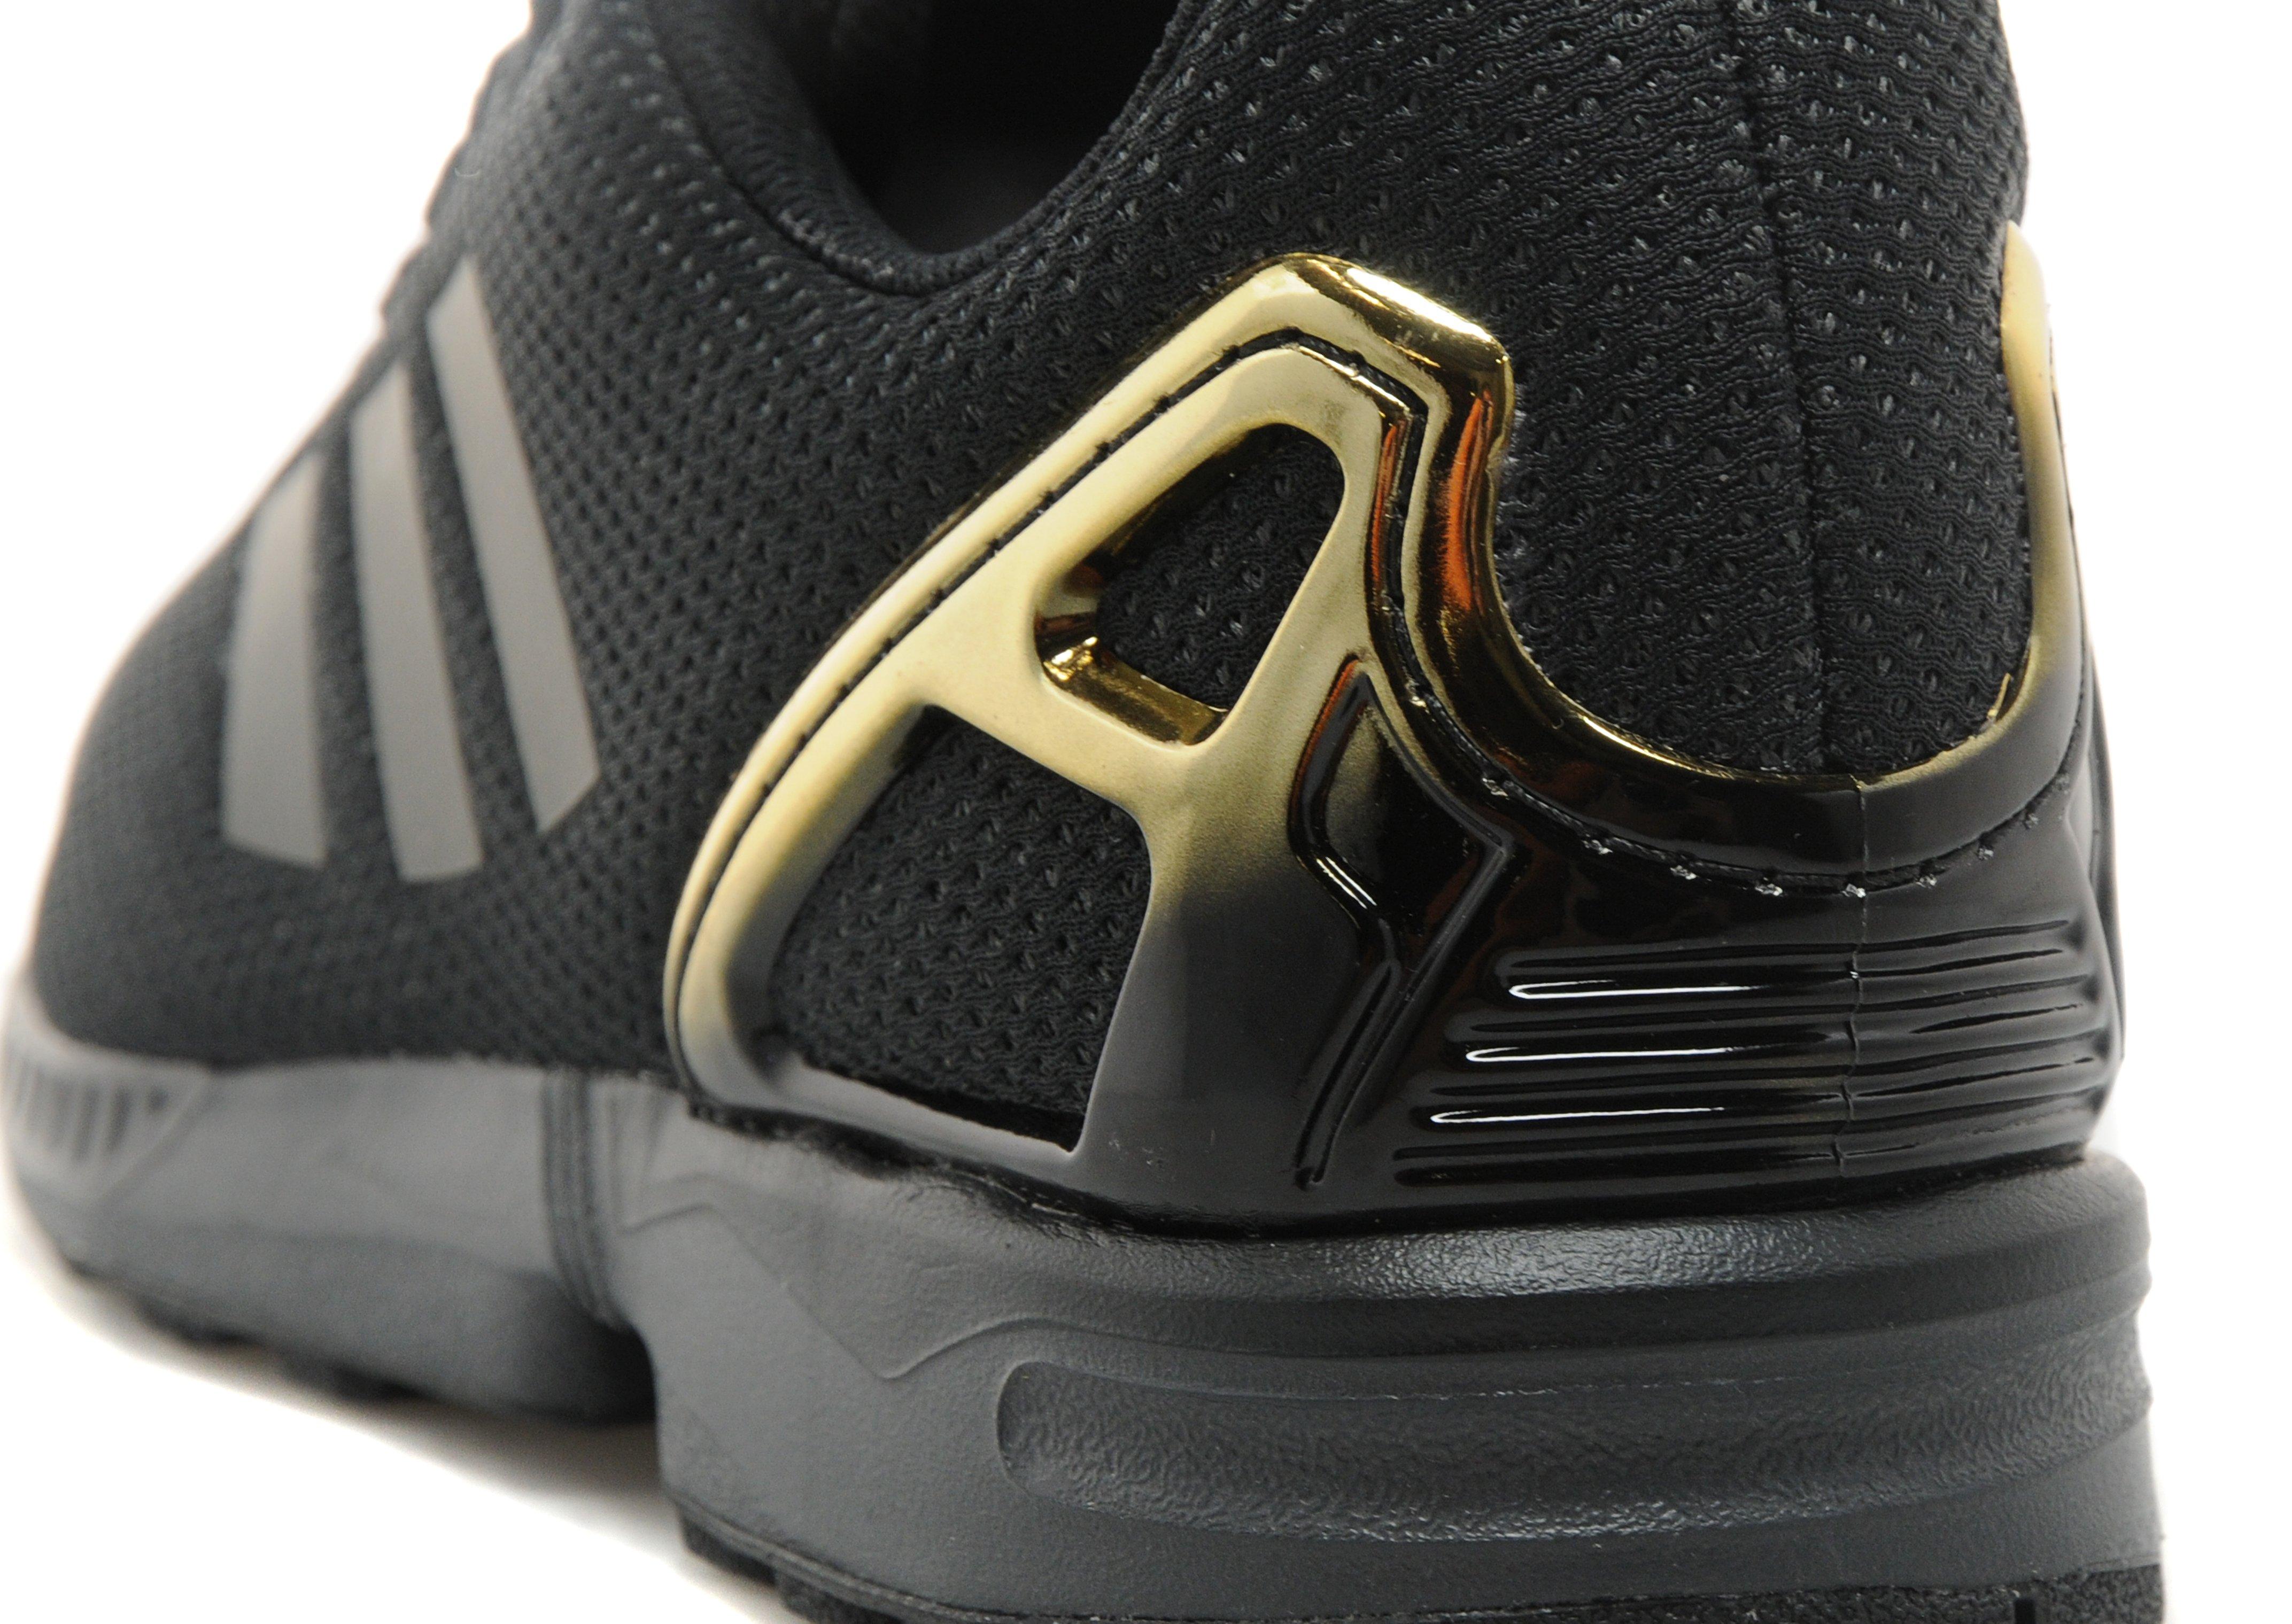 adidas zx flux black and gold mens- OFF 54% - www.butc.co.za!